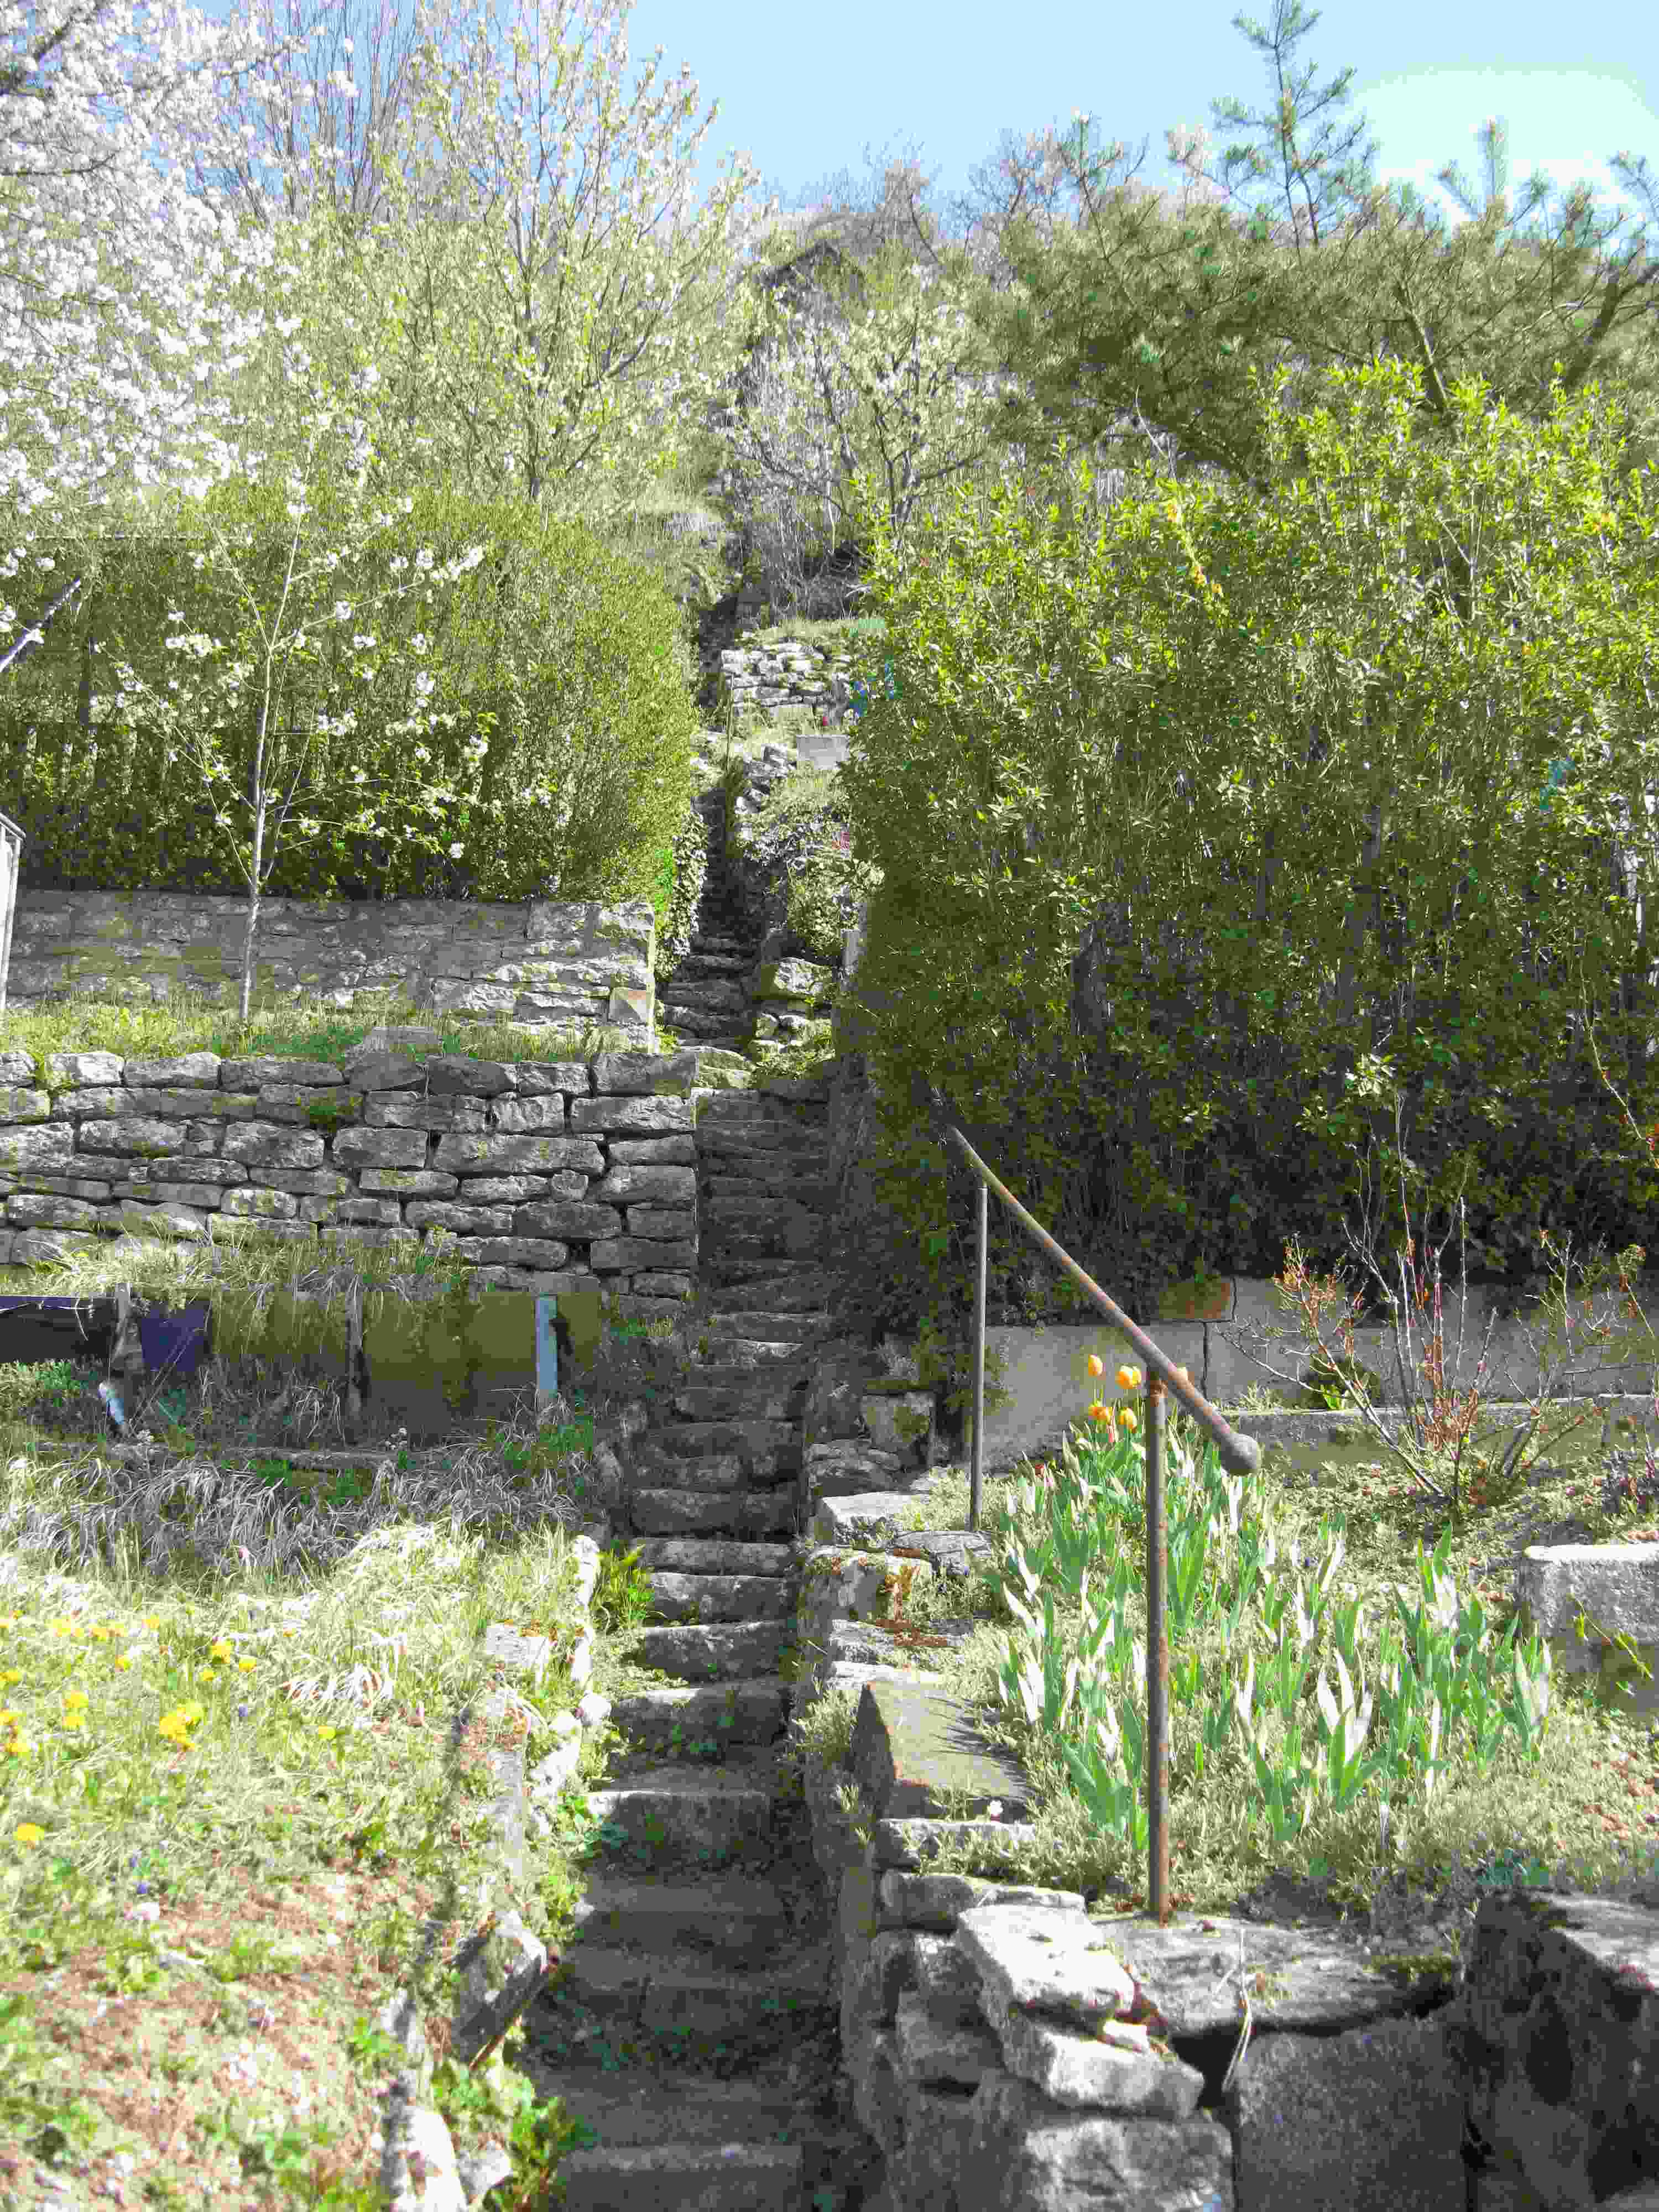 stone steps are cut into the side of the hillside separating adjacent tiny groups of grape vines.